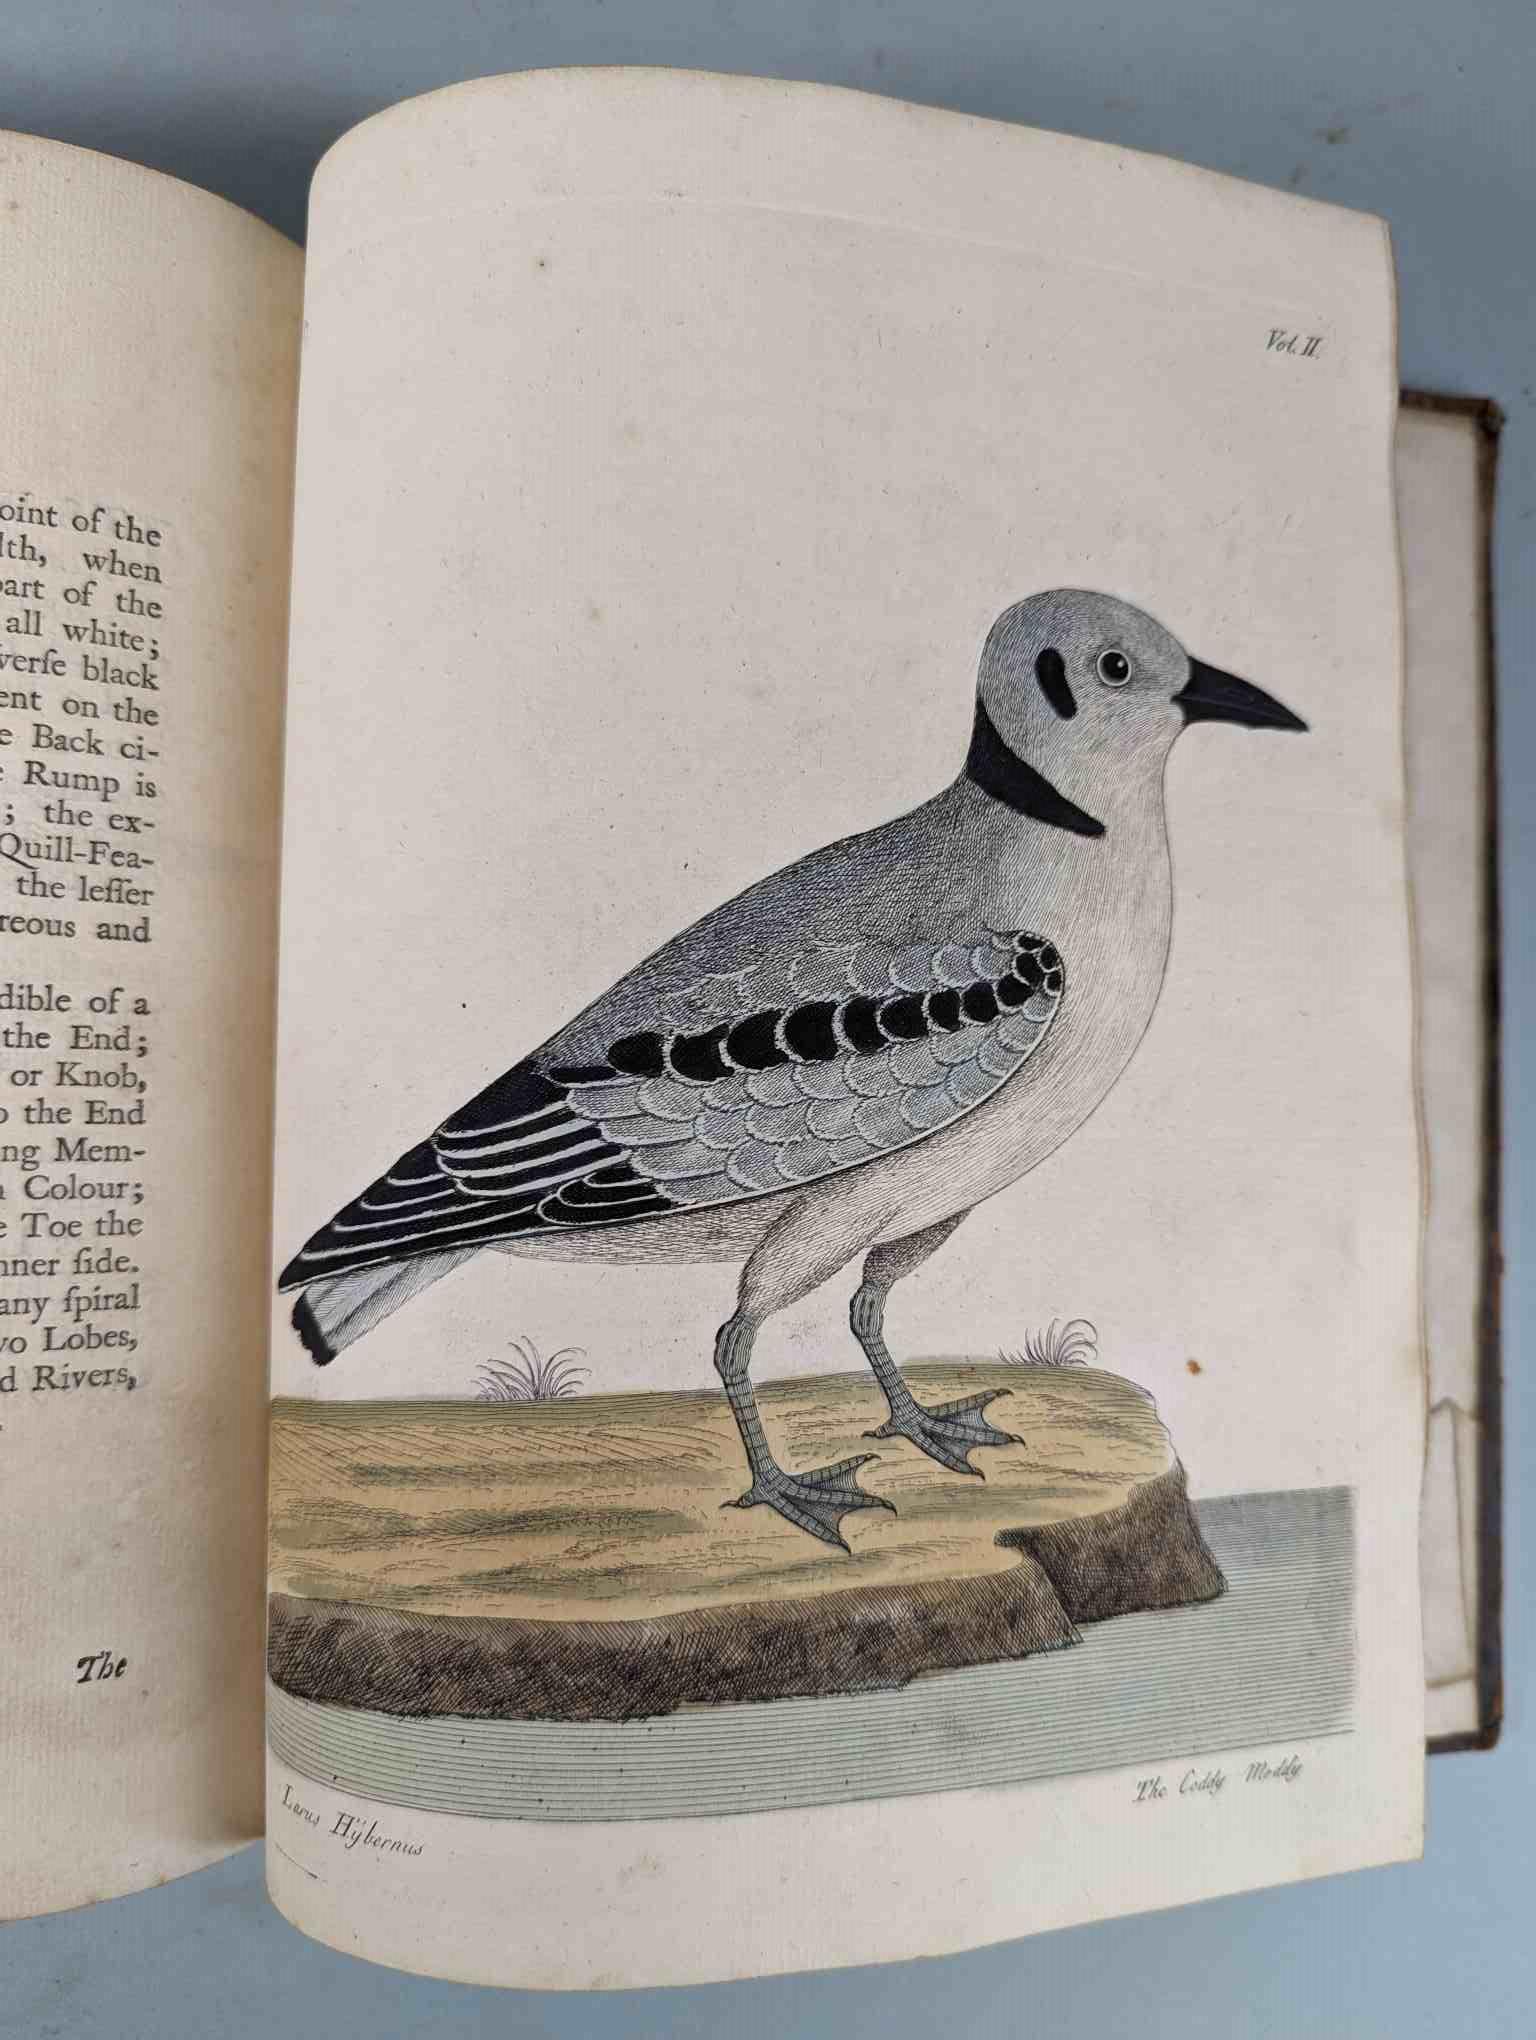 ALBIN, Eleazar. A Natural History of Birds, to which are added, Notes and Observations by W. - Image 191 of 208